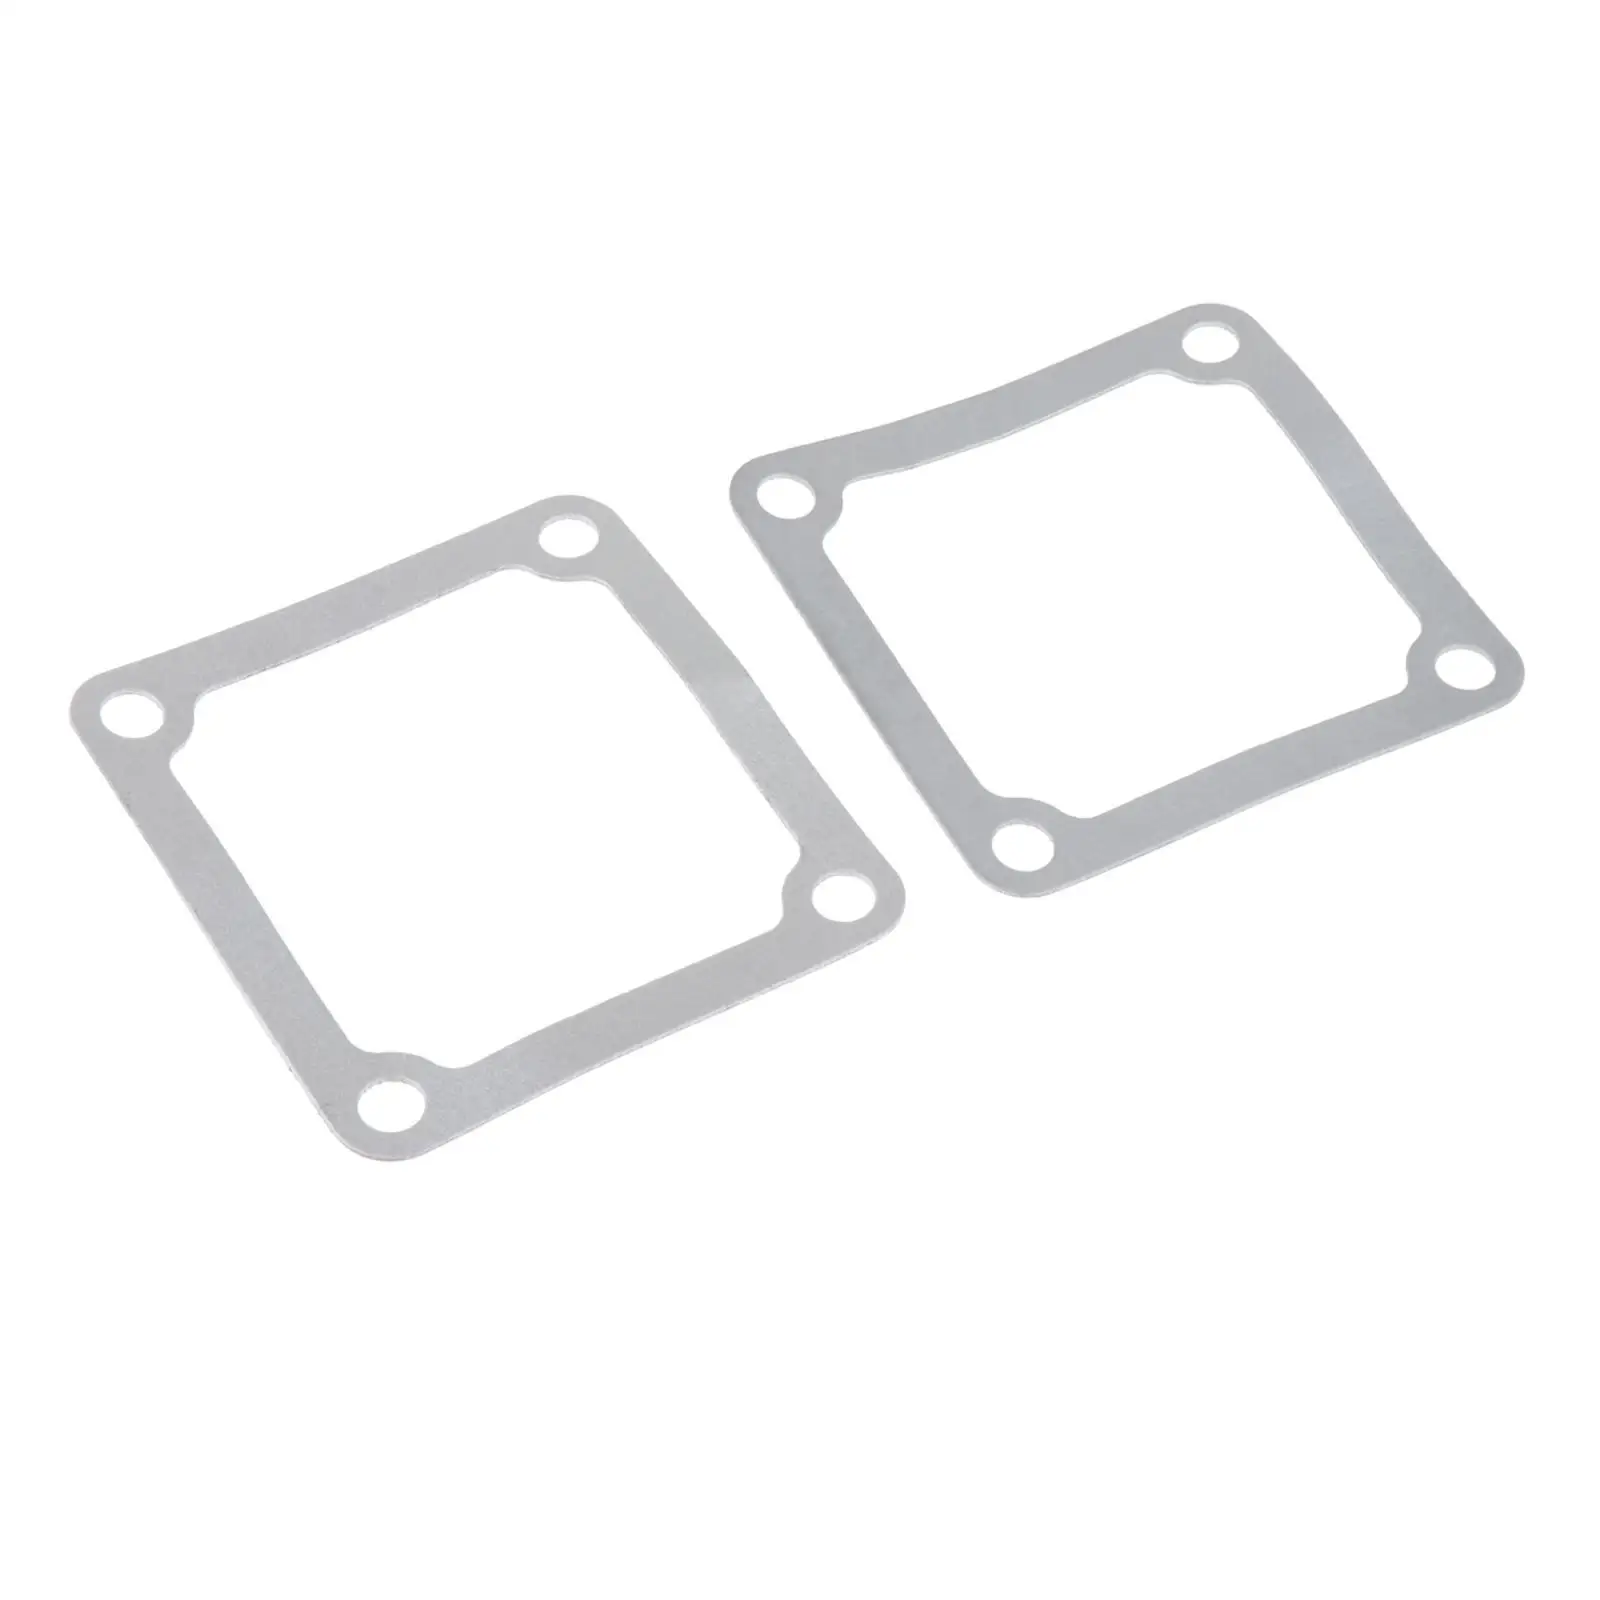 2x Intake Heater Grid Gaskets 12V, 24V 93x98mm Automobile 5.9L Spare Replacement